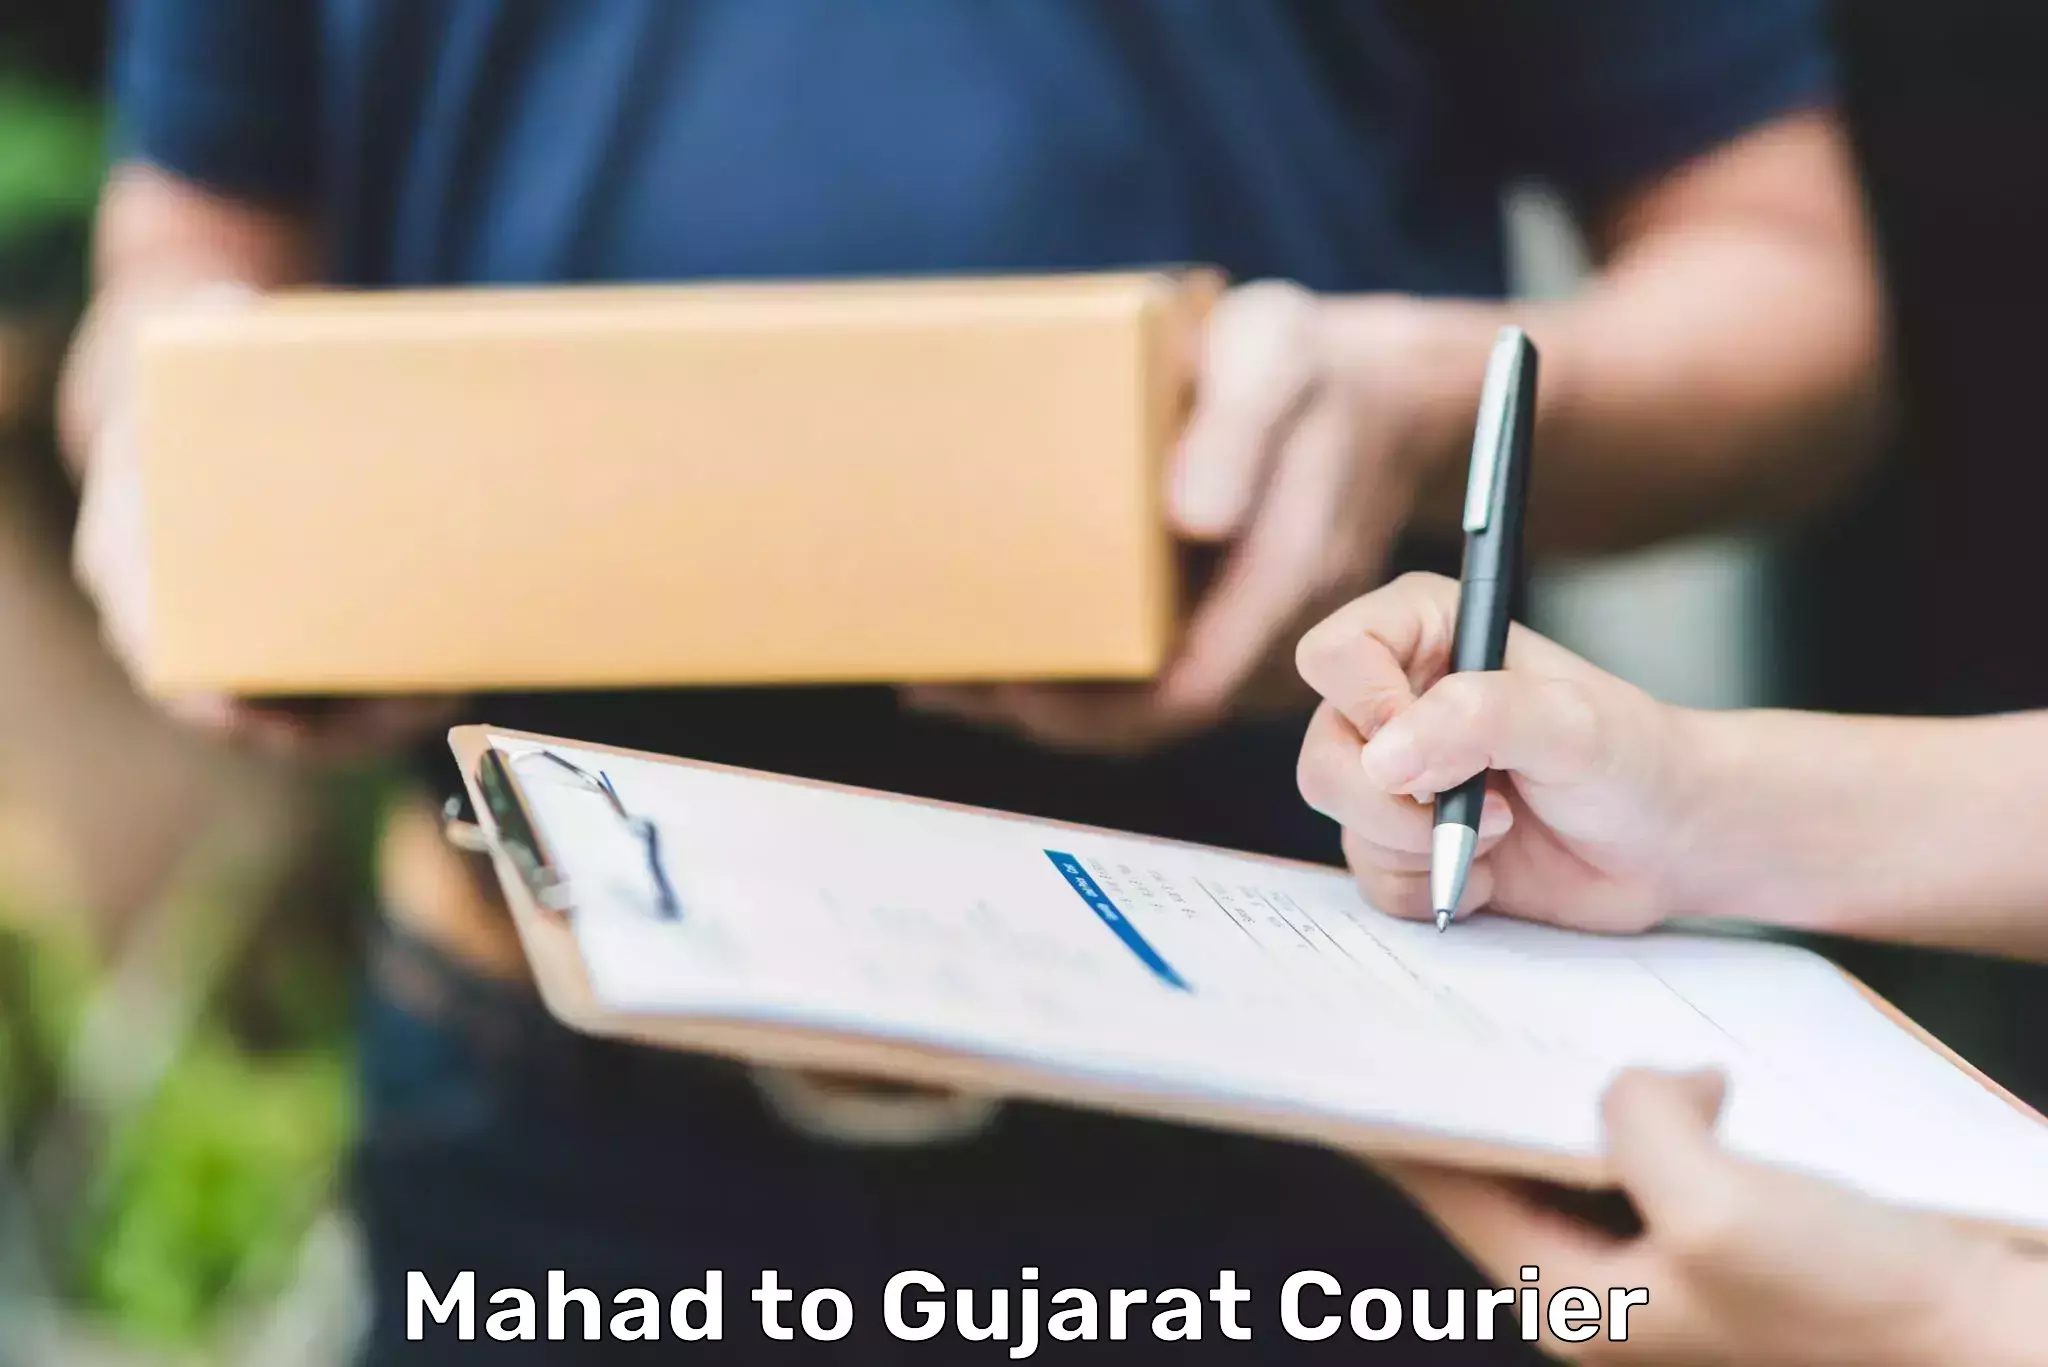 State-of-the-art courier technology Mahad to Kalol Gujarat